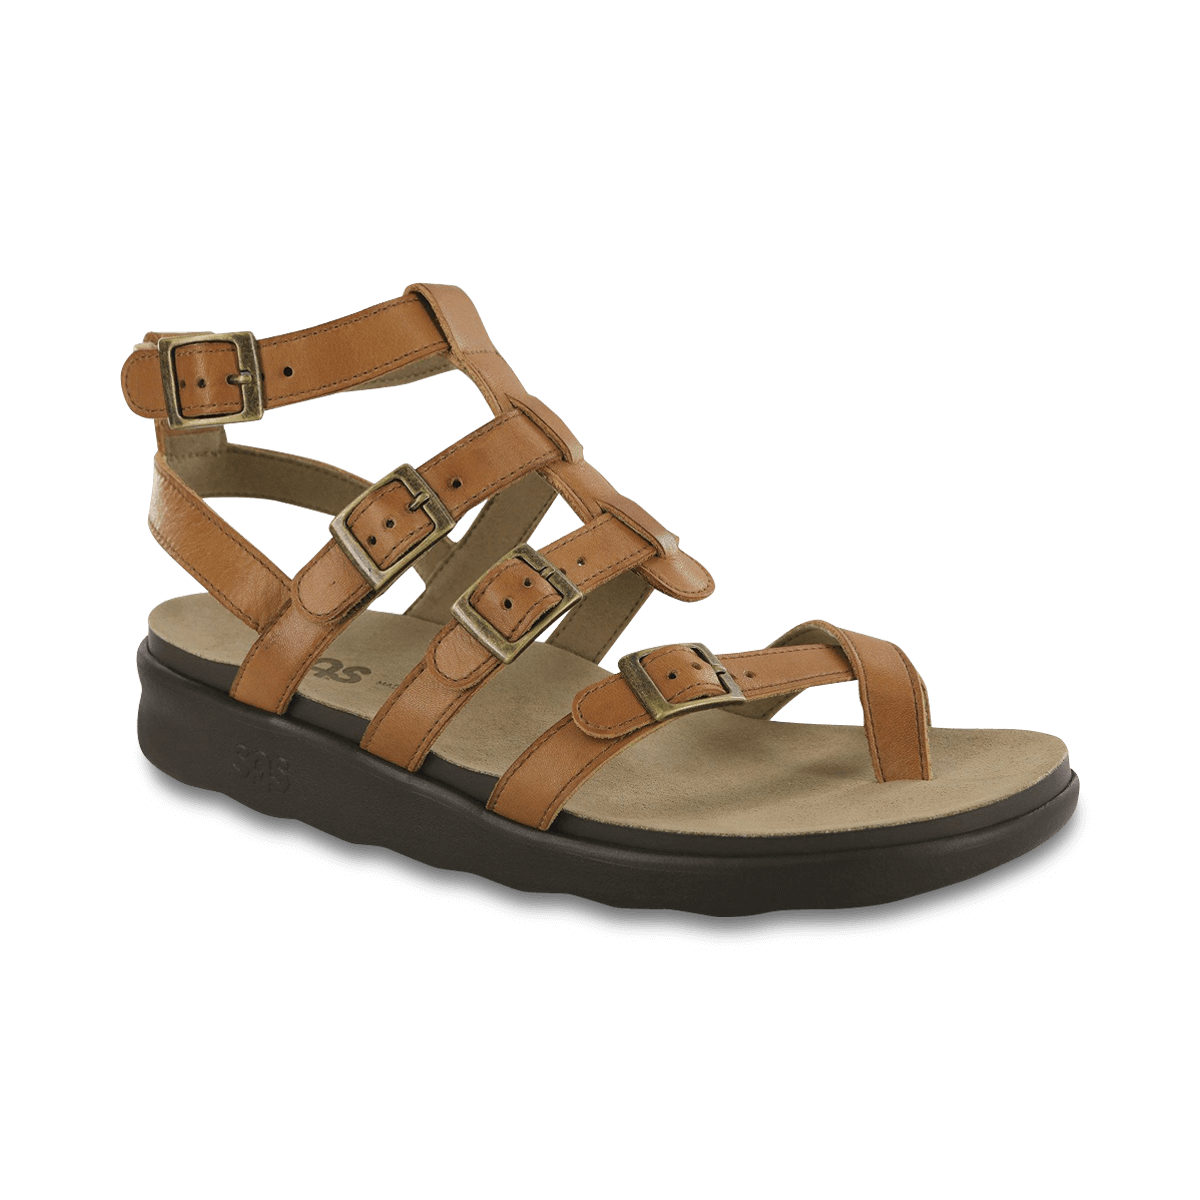 Details more than 226 gladiator sandals meaning best